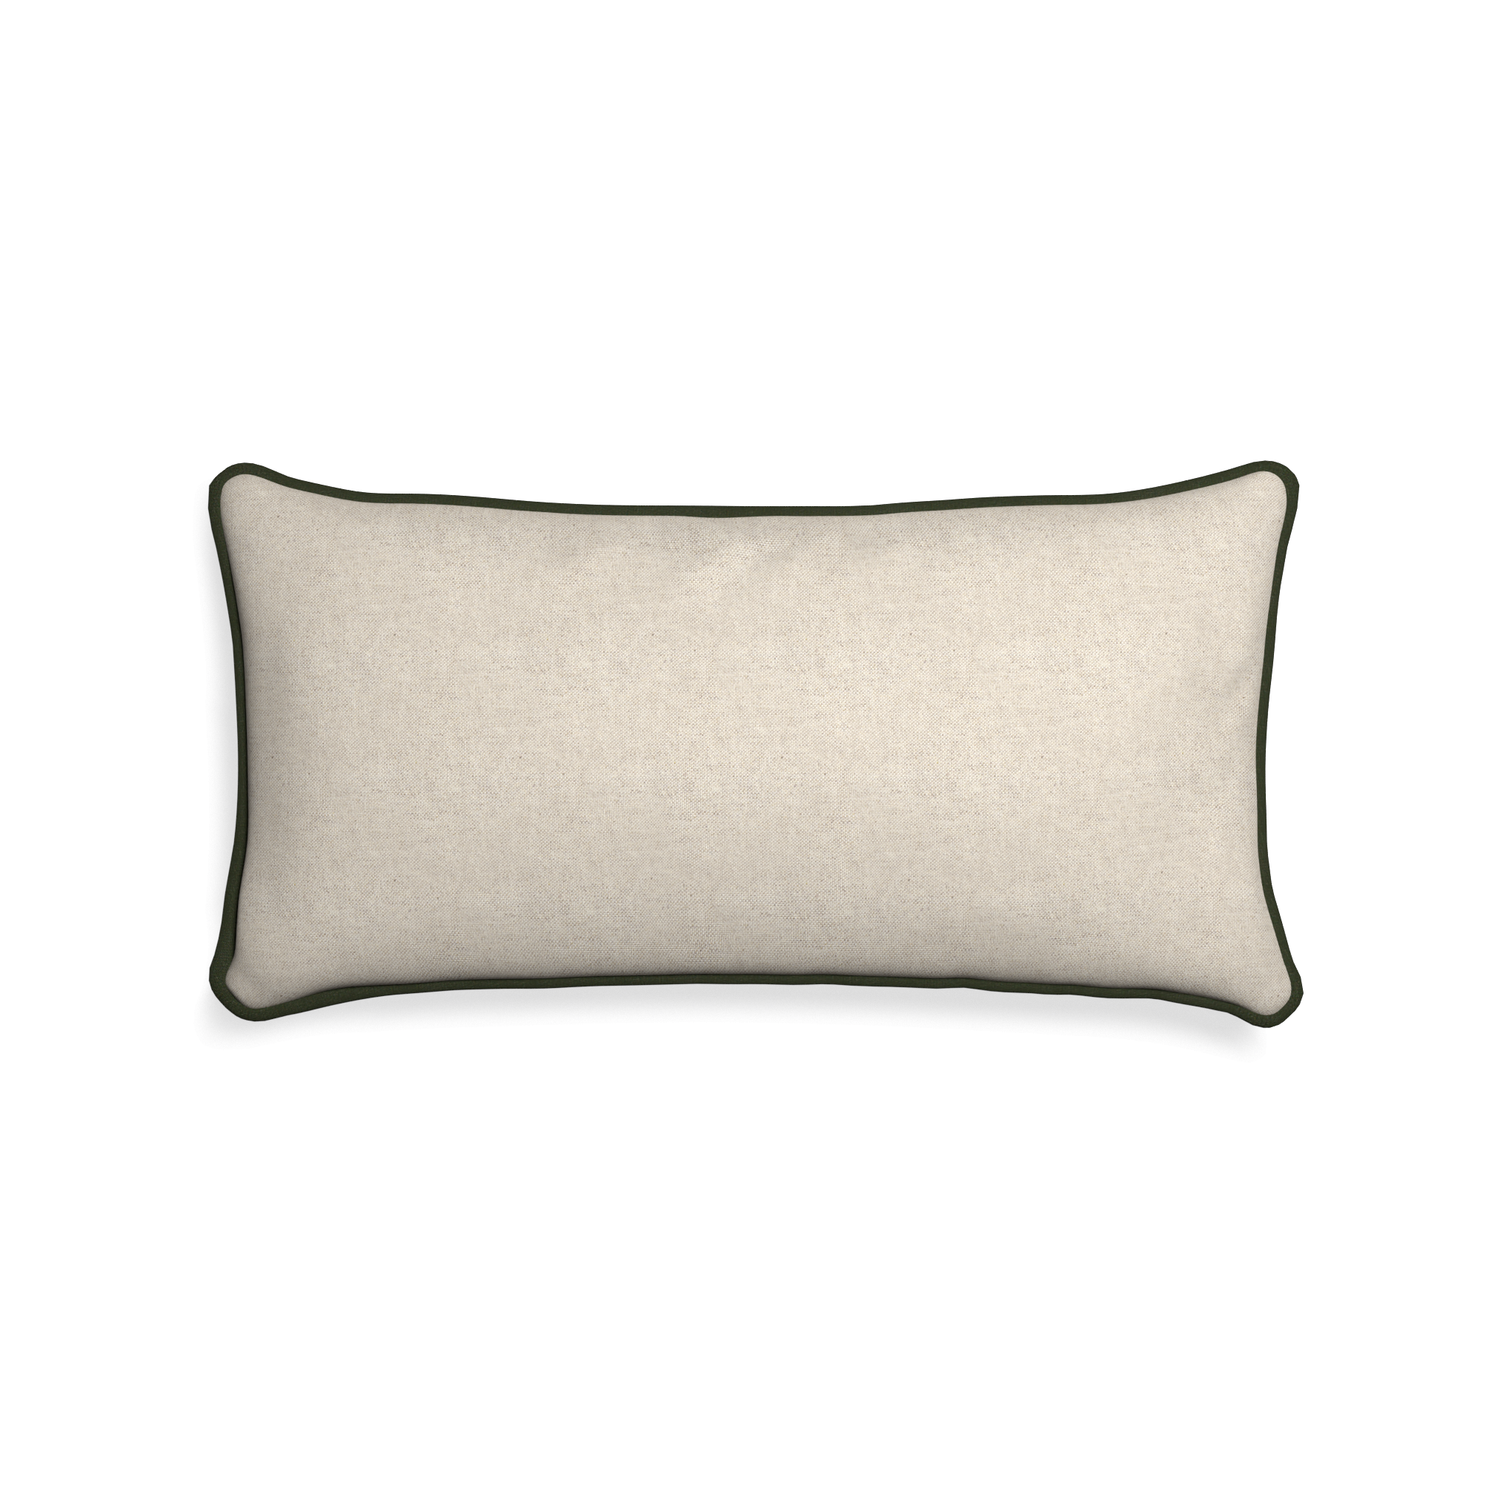 Midi-lumbar oat custom light brownpillow with f piping on white background